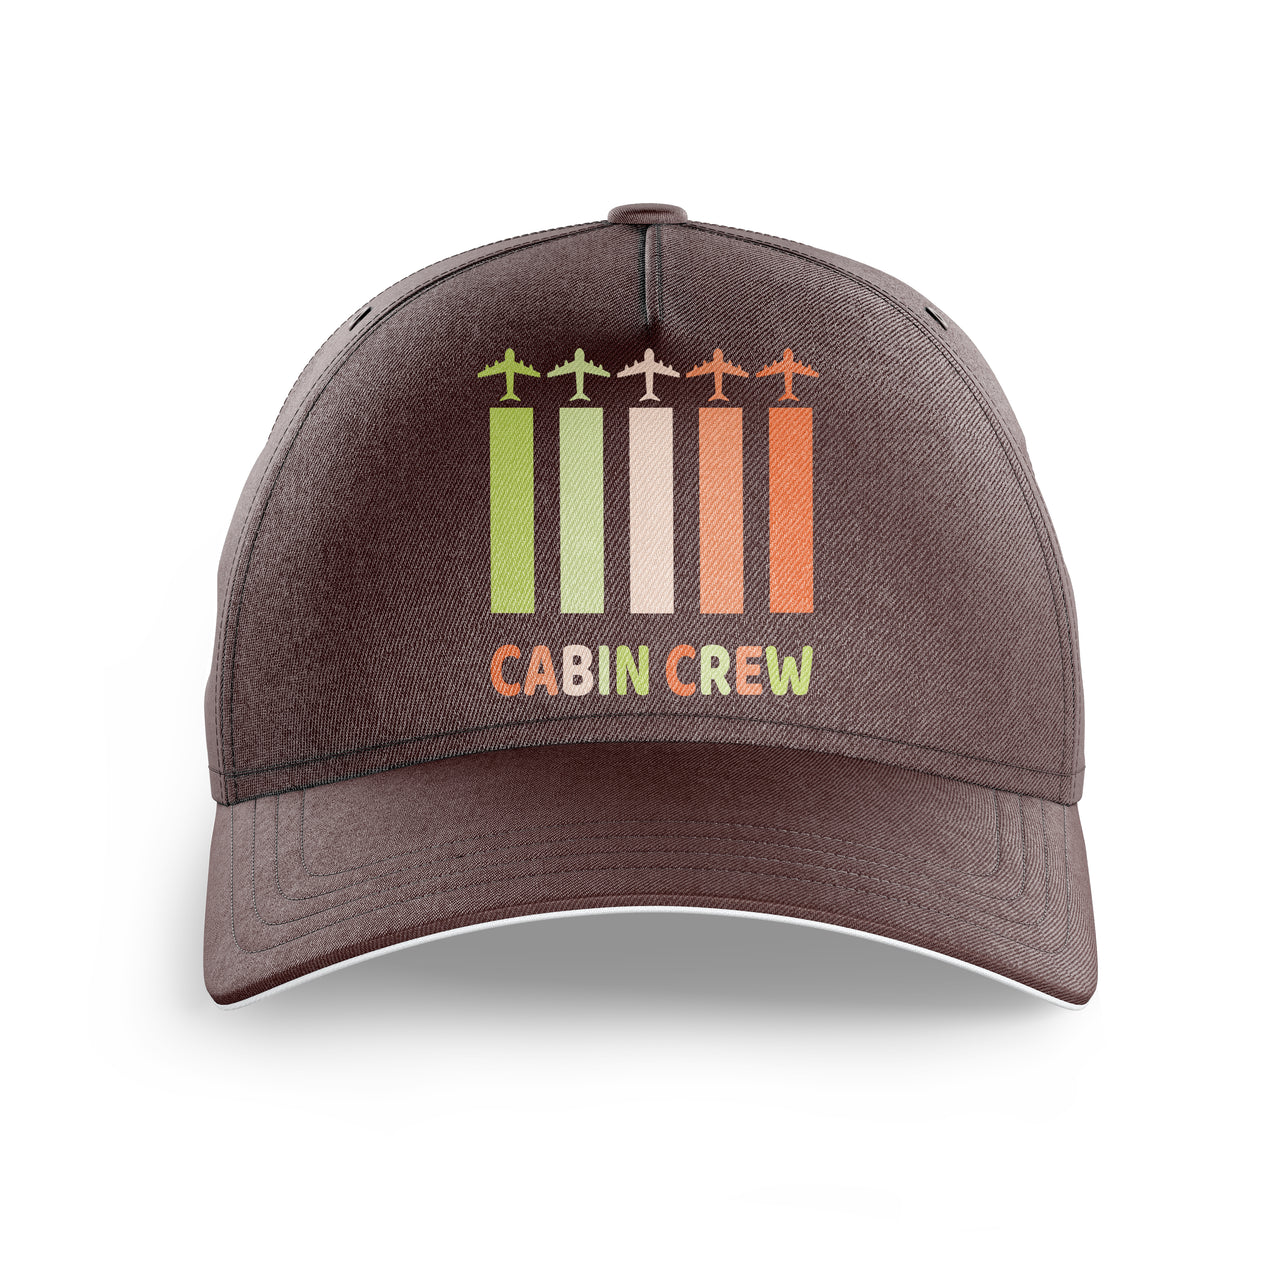 Colourful Cabin Crew Printed Hats